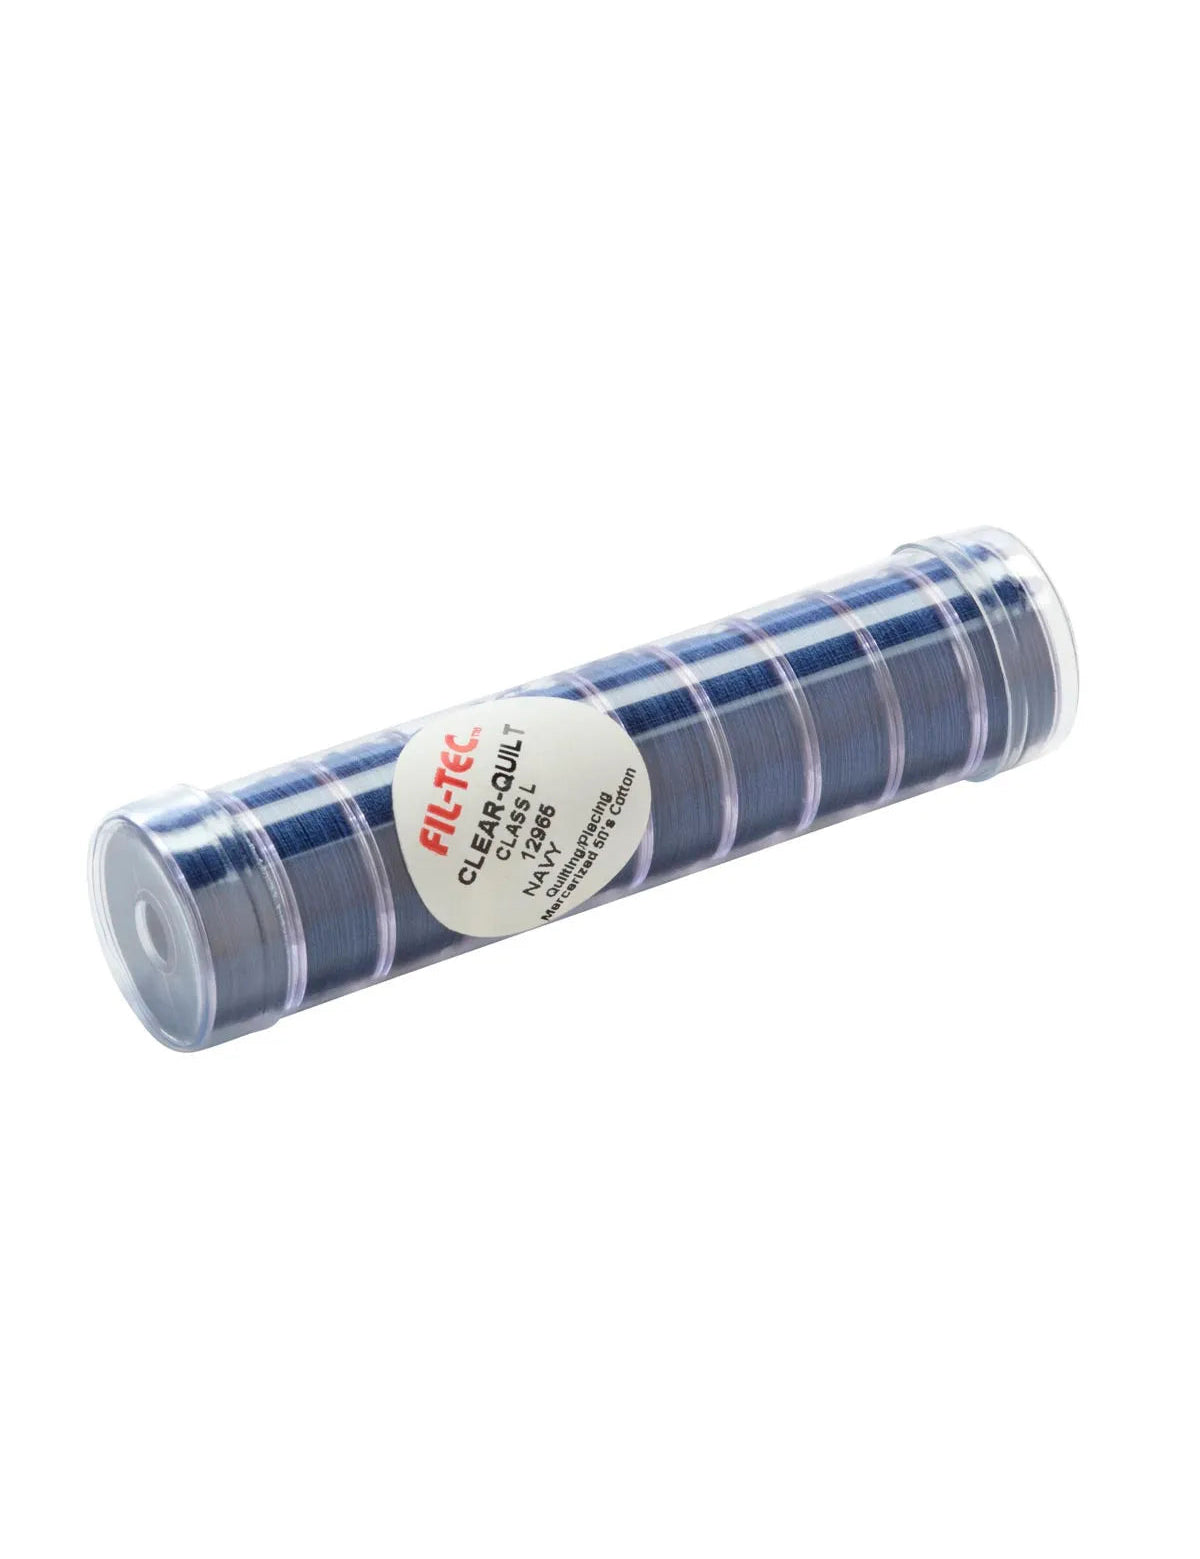 Clear-Quilt Cotton Bobbins - Tube of 10, Style L